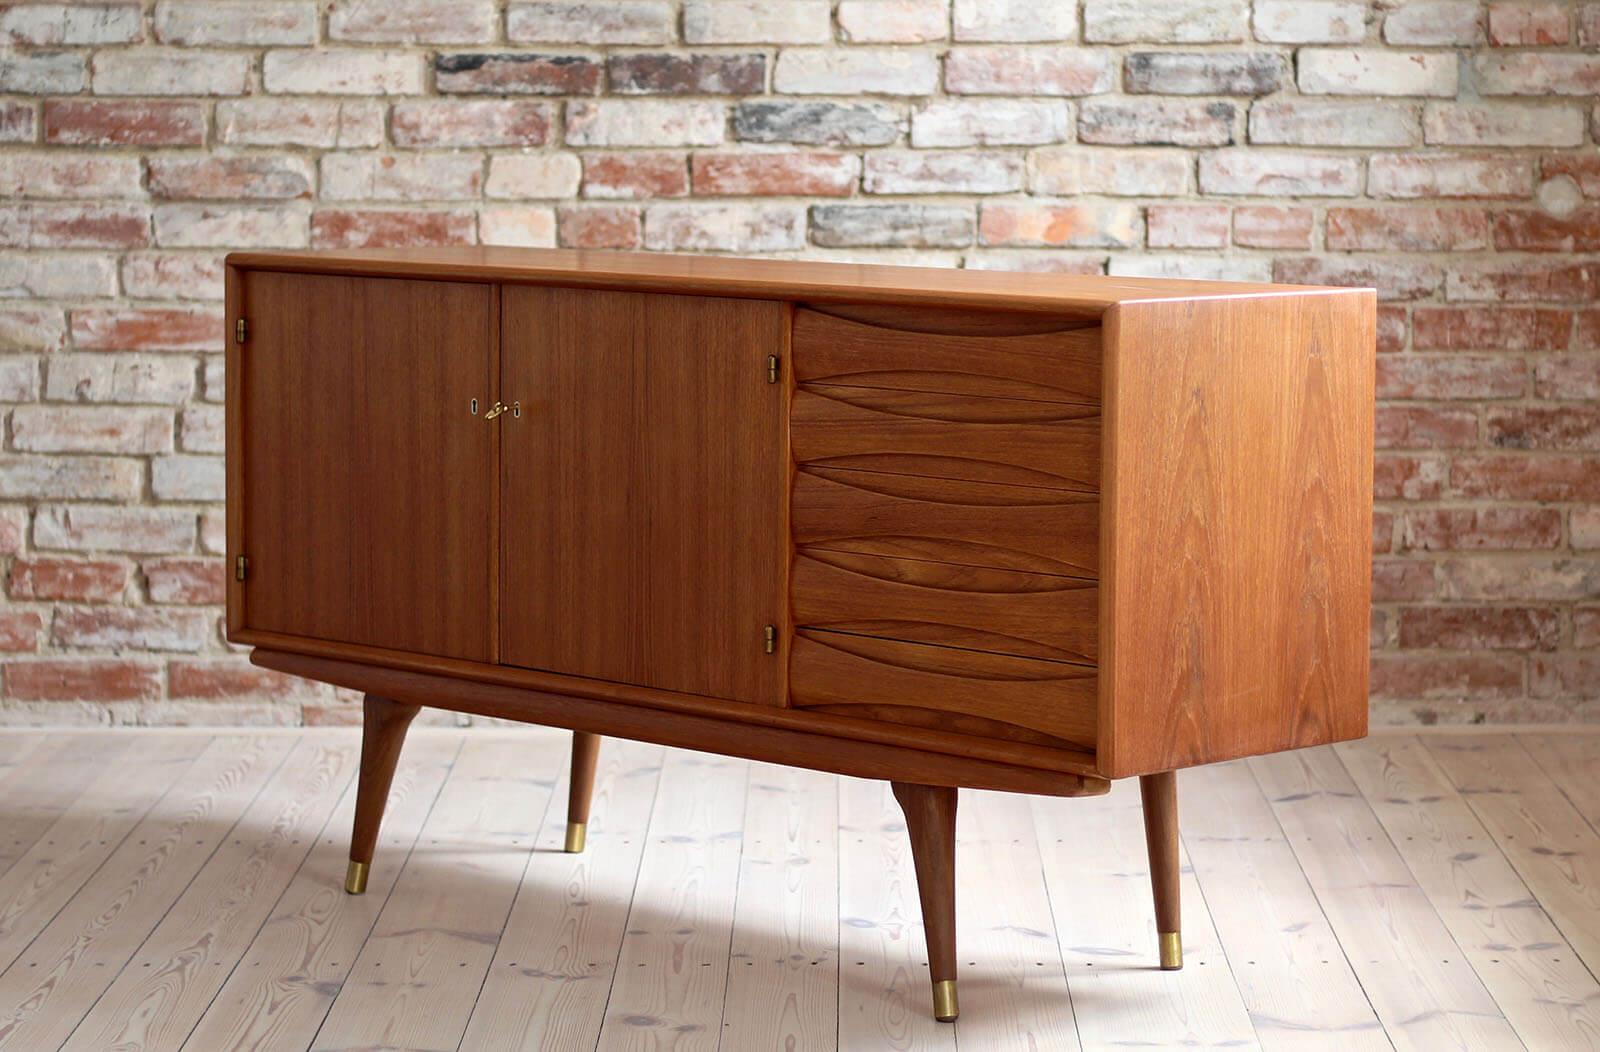 This is a quite rare Sven Andersen teak sideboard designed and manufactured in Norway around second half of 1950s. The piece features two doors that reveal lots of storage space and five drawers in the section on the right. The sideboard features